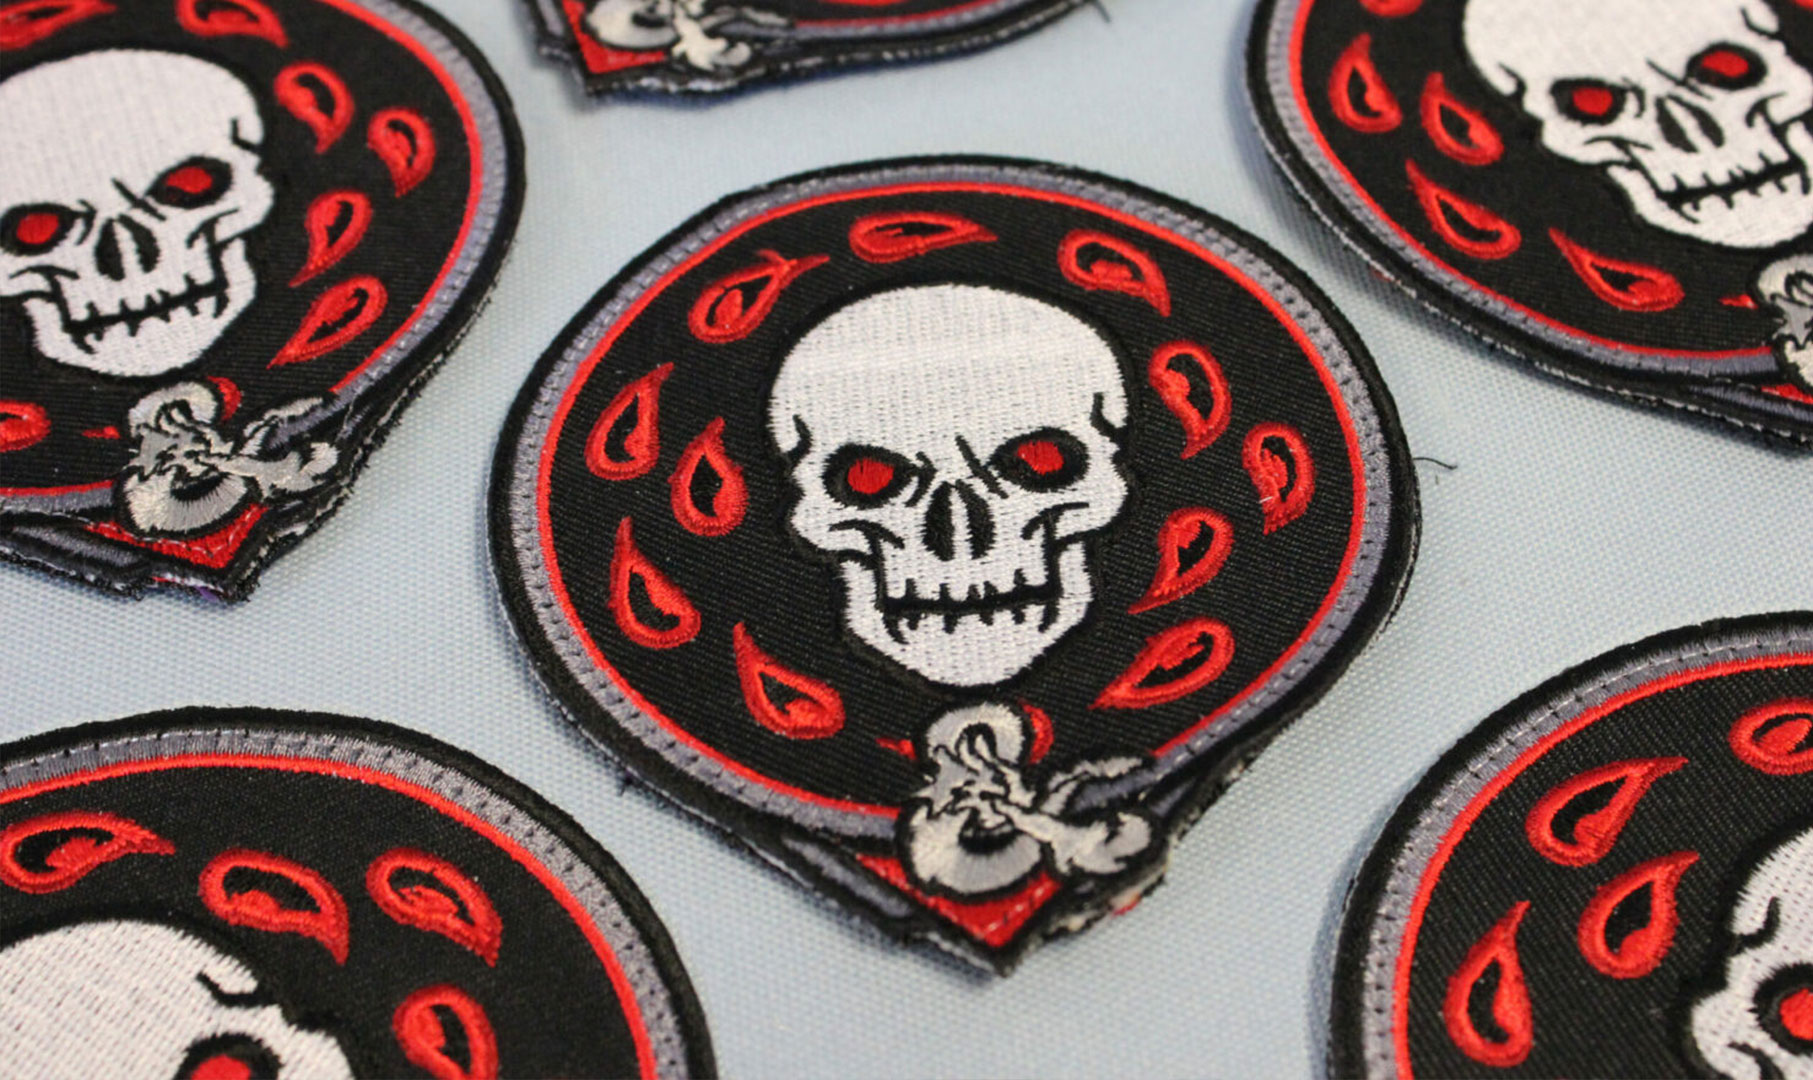 Image of black and red embroidered patch with white skull icon on it